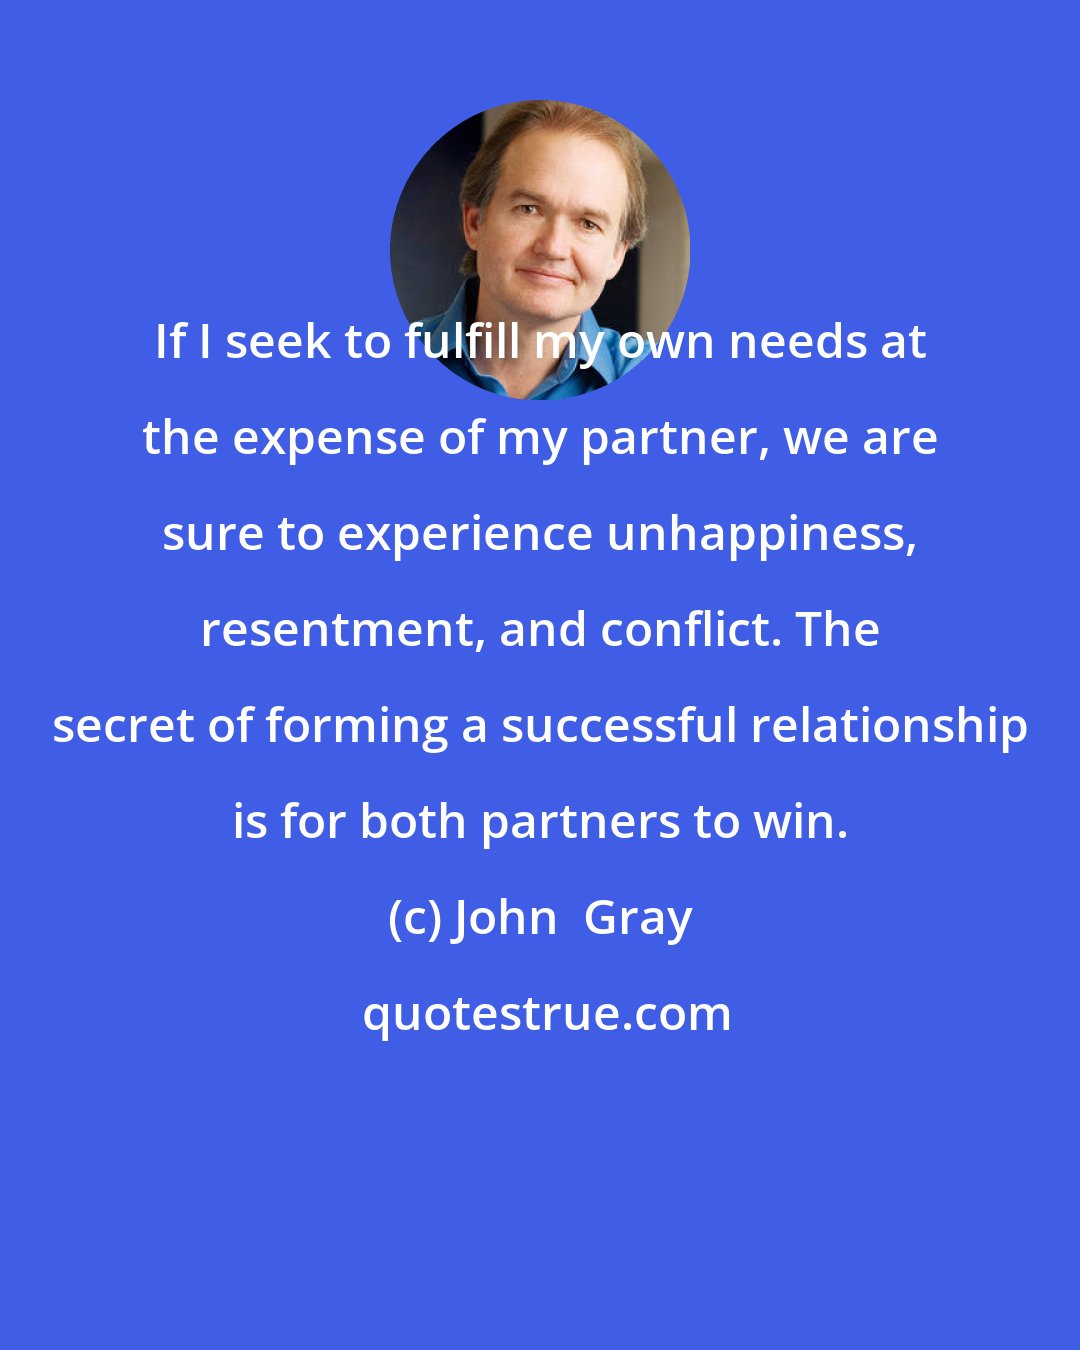 John  Gray: If I seek to fulfill my own needs at the expense of my partner, we are sure to experience unhappiness, resentment, and conflict. The secret of forming a successful relationship is for both partners to win.